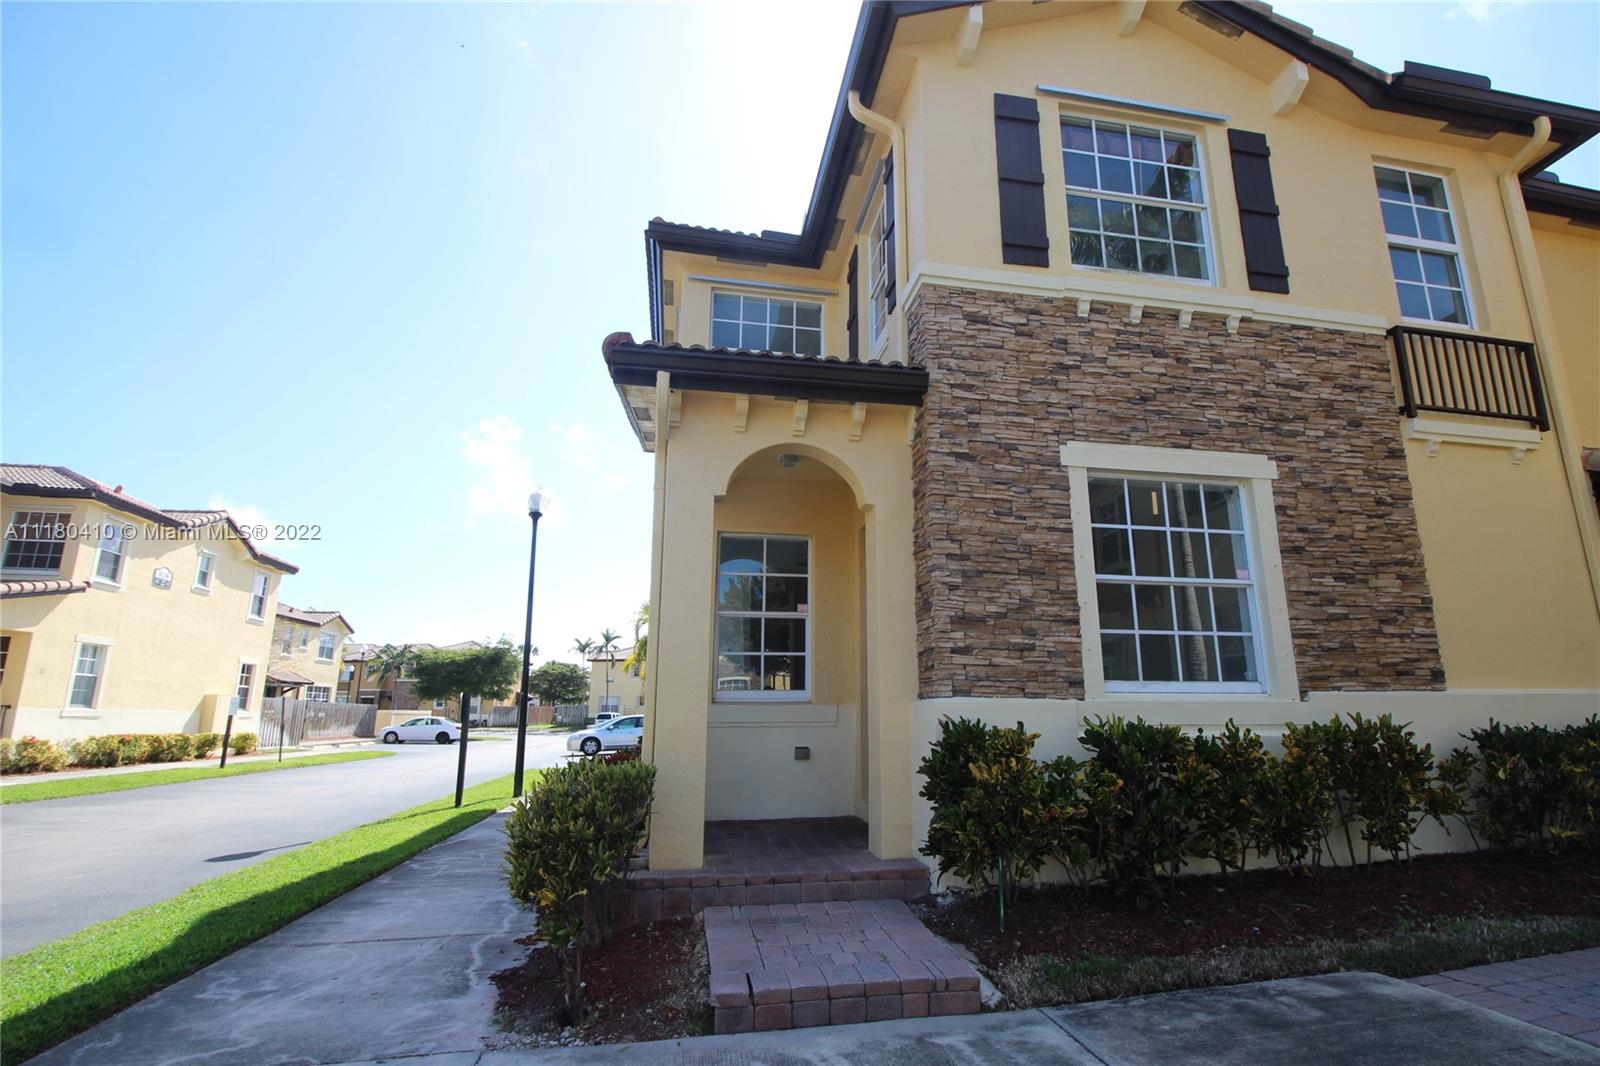 AMAZING CORNER TOWNHOUSE IN THE ISLES AT BAYSHORE COMMUNITY, REMODELED WITH TILE THROUGHOUT,  3 BEDROOM 2.5 BATHROOMS, ALL BEDROOMS UPSTAIRS FULL SIZE WASHER AND DRYER, IN A GREAT AREA, BEAUTIFUL CLUBHOUSE AND AMENTIES. CALL TODAY VERY EASY TO SHOW, HOA APPROVAL NEEDED....IF YOU SUBMITT A COMPLETE PACKAGE YOU WILL GET A QUICK RESPONSE. CORNER UNIT #1 NOT #26